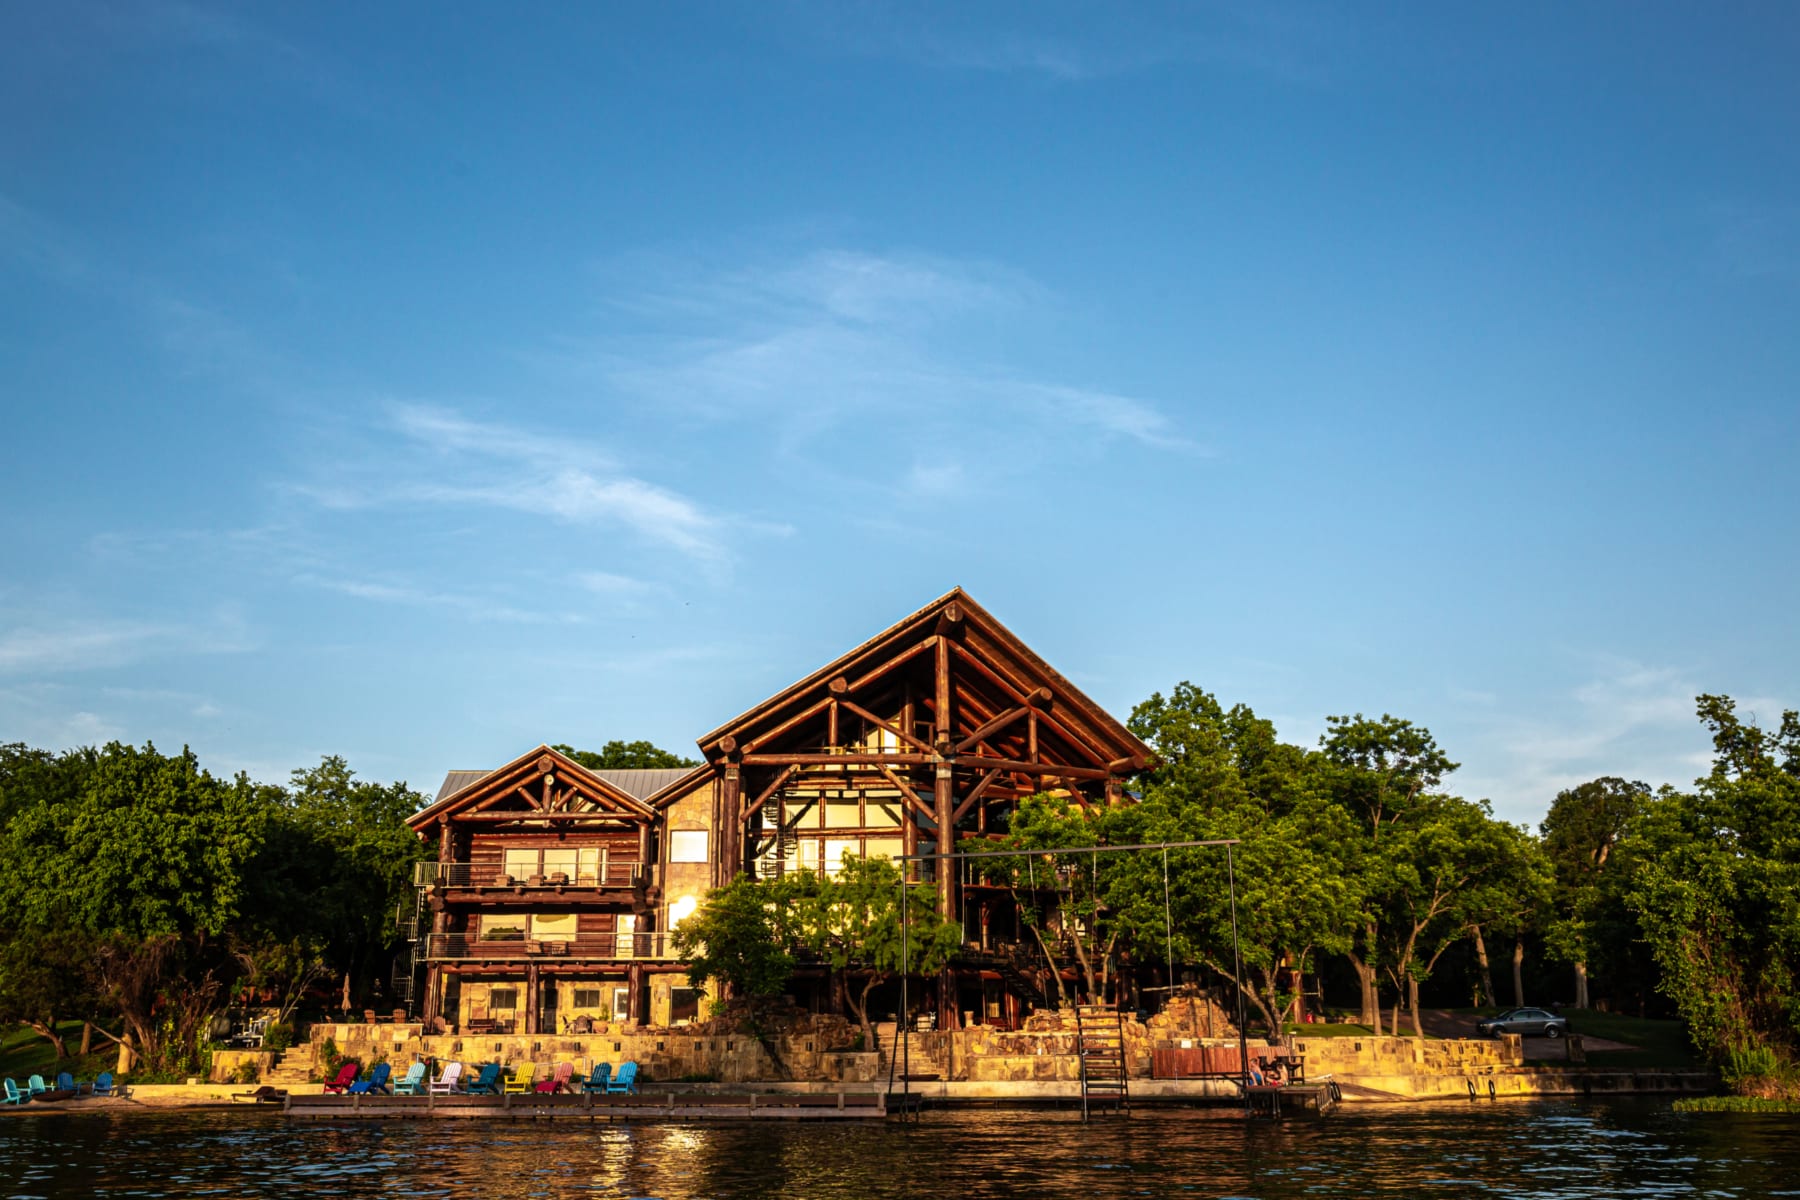 Big Timber Lodge - view from the lake of the Lodge